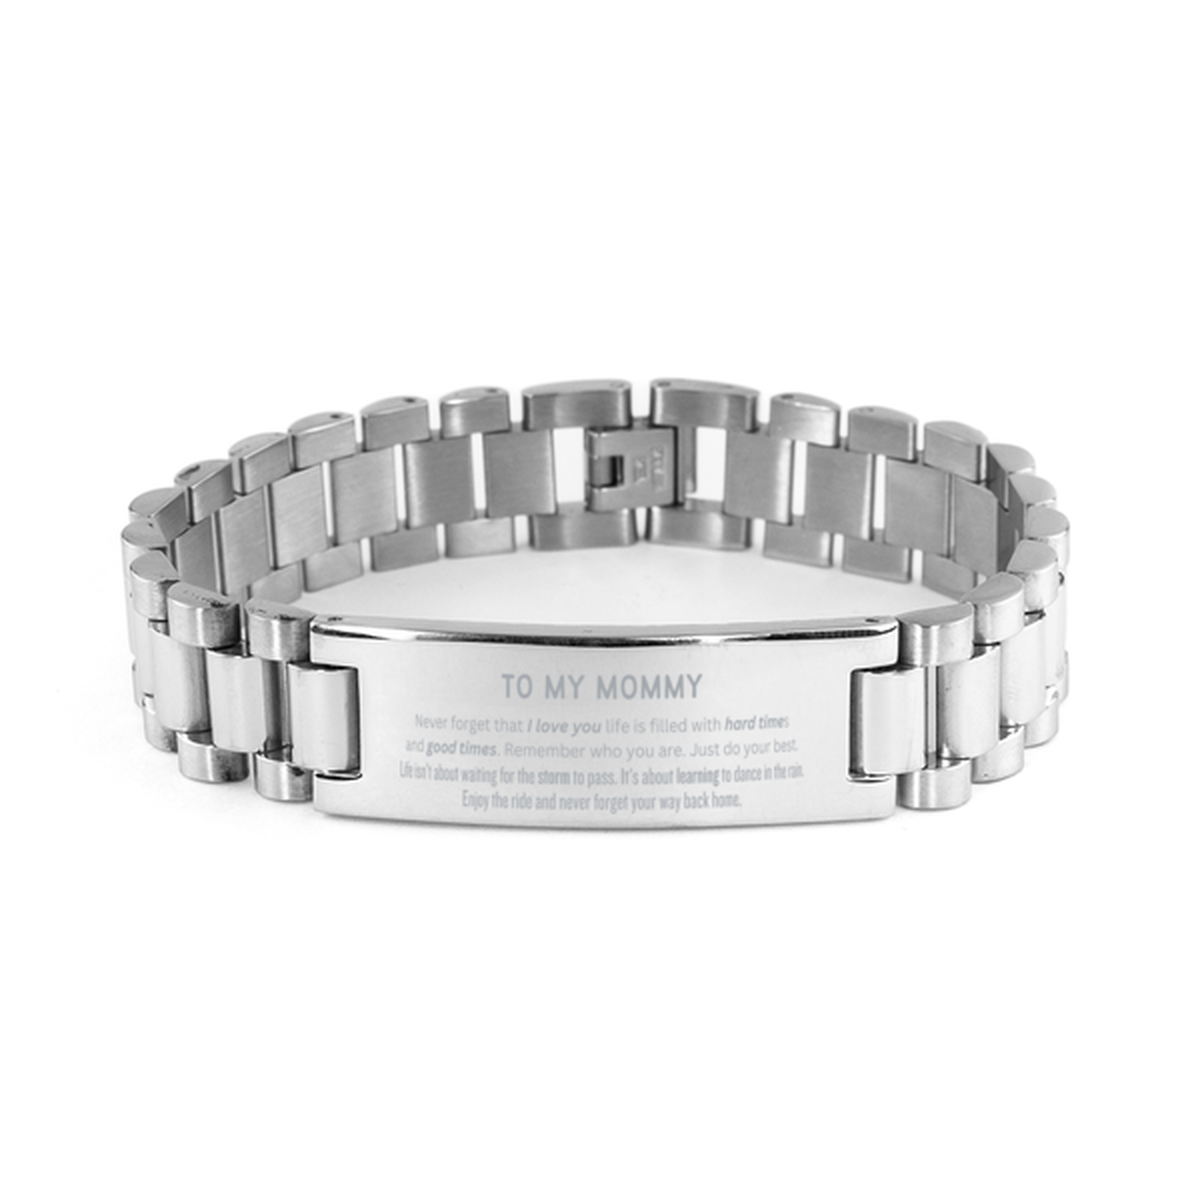 Christmas Mommy Ladder Stainless Steel Bracelet Gifts, To My Mommy Birthday Thank You Gifts For Mommy, Graduation Unique Gifts For Mommy To My Mommy Never forget that I love you life is filled with hard times and good times. Remember who you are. Just do